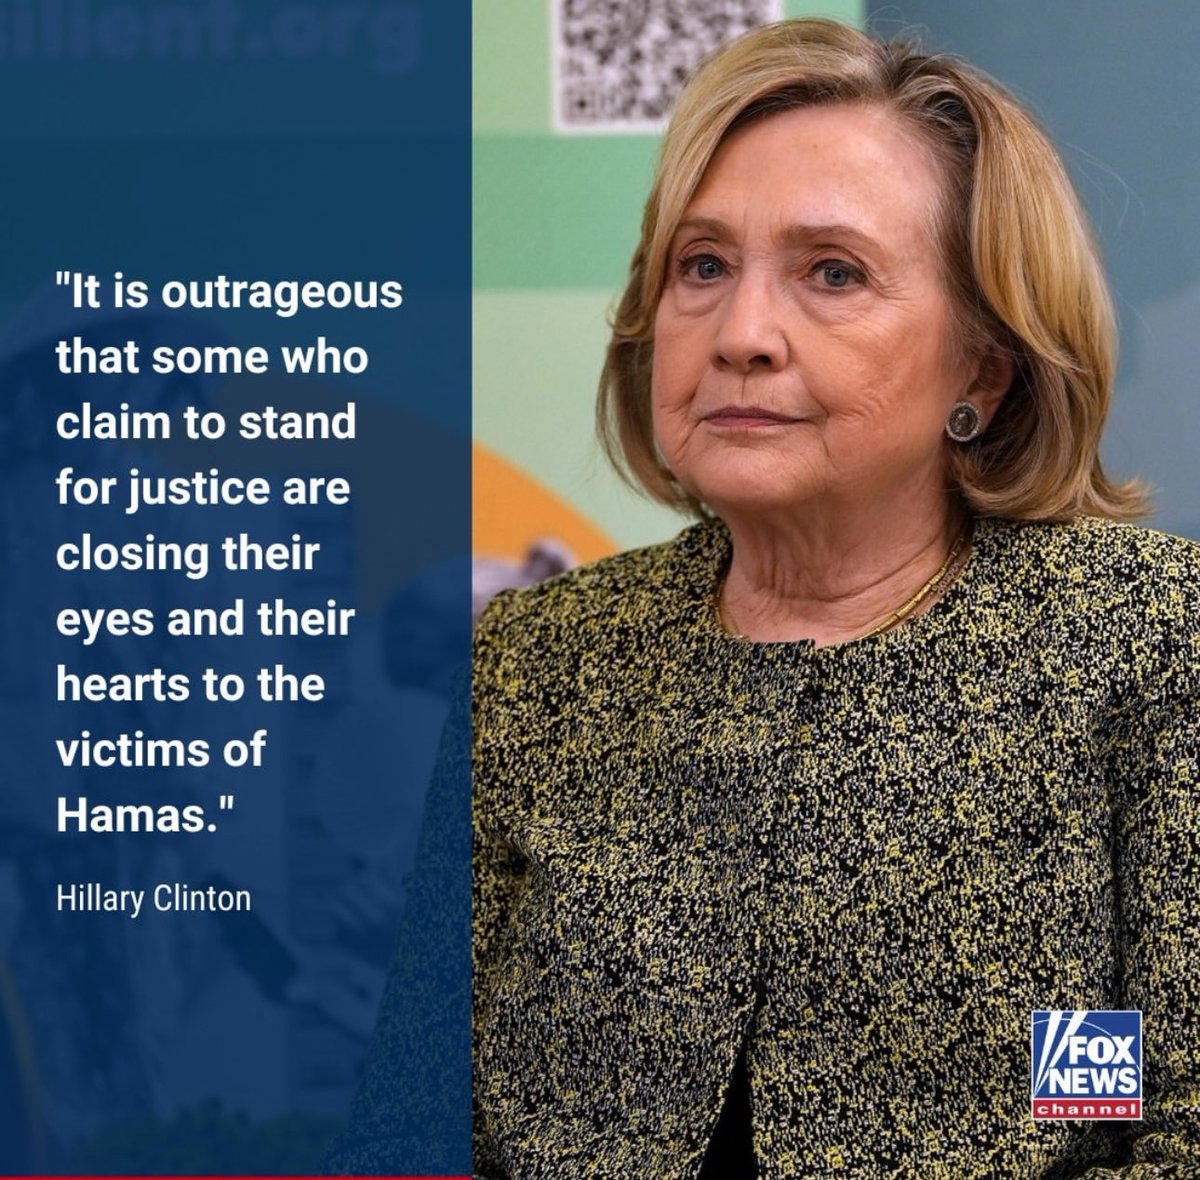 Bipartisan, white supremacist, American hubris is telling us why bombing and the genocide of Palestinians must continue in Gaza. As evidenced by Fox News heaping praise on Hillary Clinton, both Democrats and Republicans find common ground when it comes to defending Israel’s…